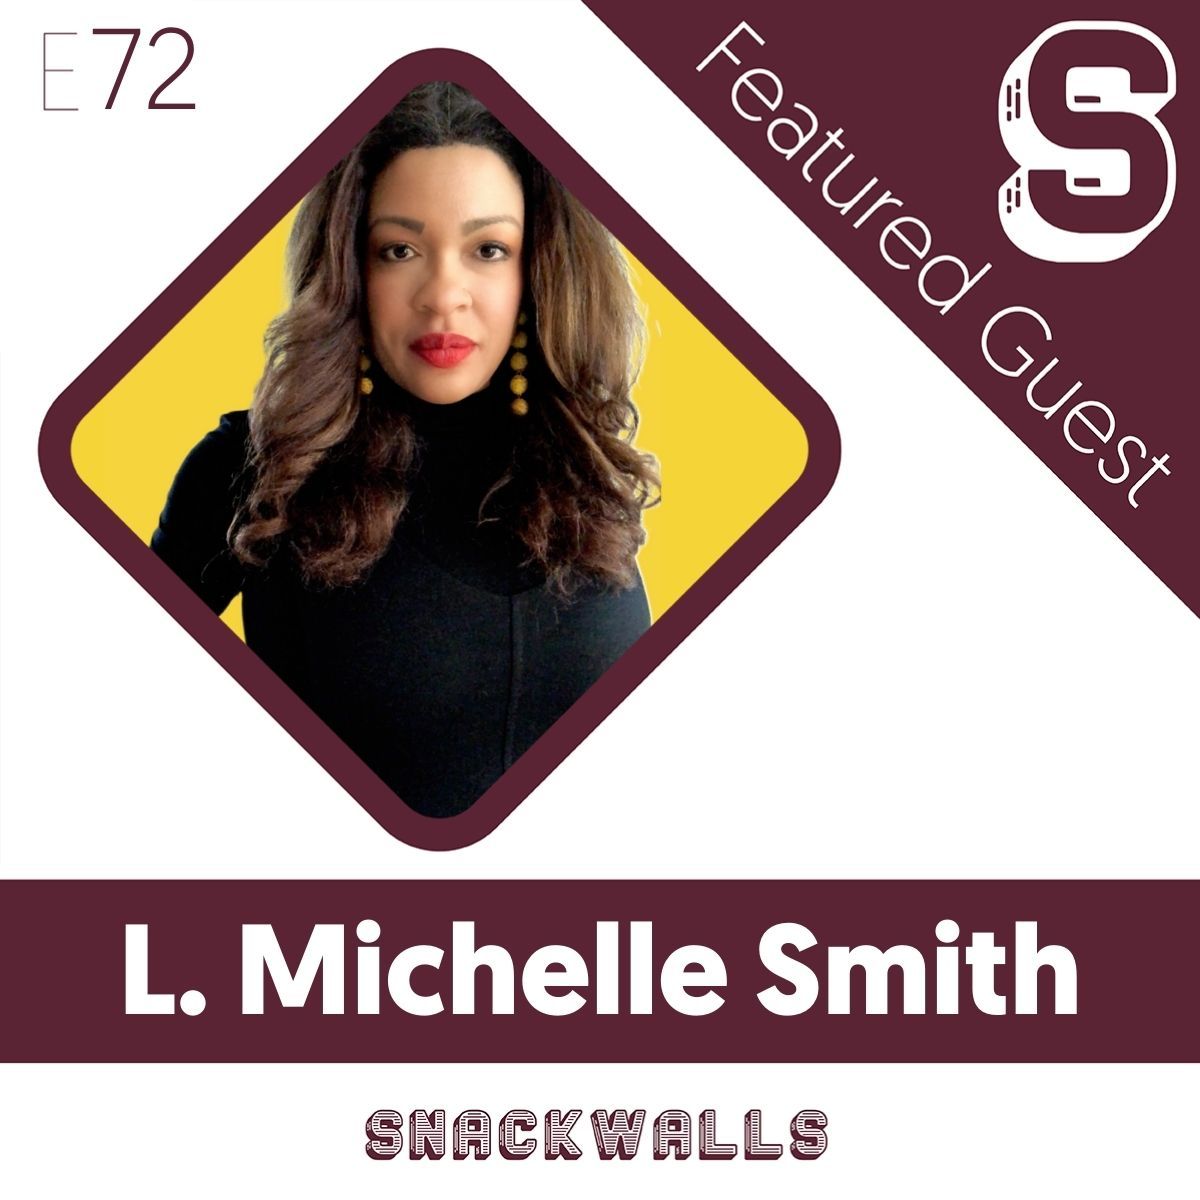 LMS Talks Recruiting Women of Color in Tech on SnackWalls Podcast